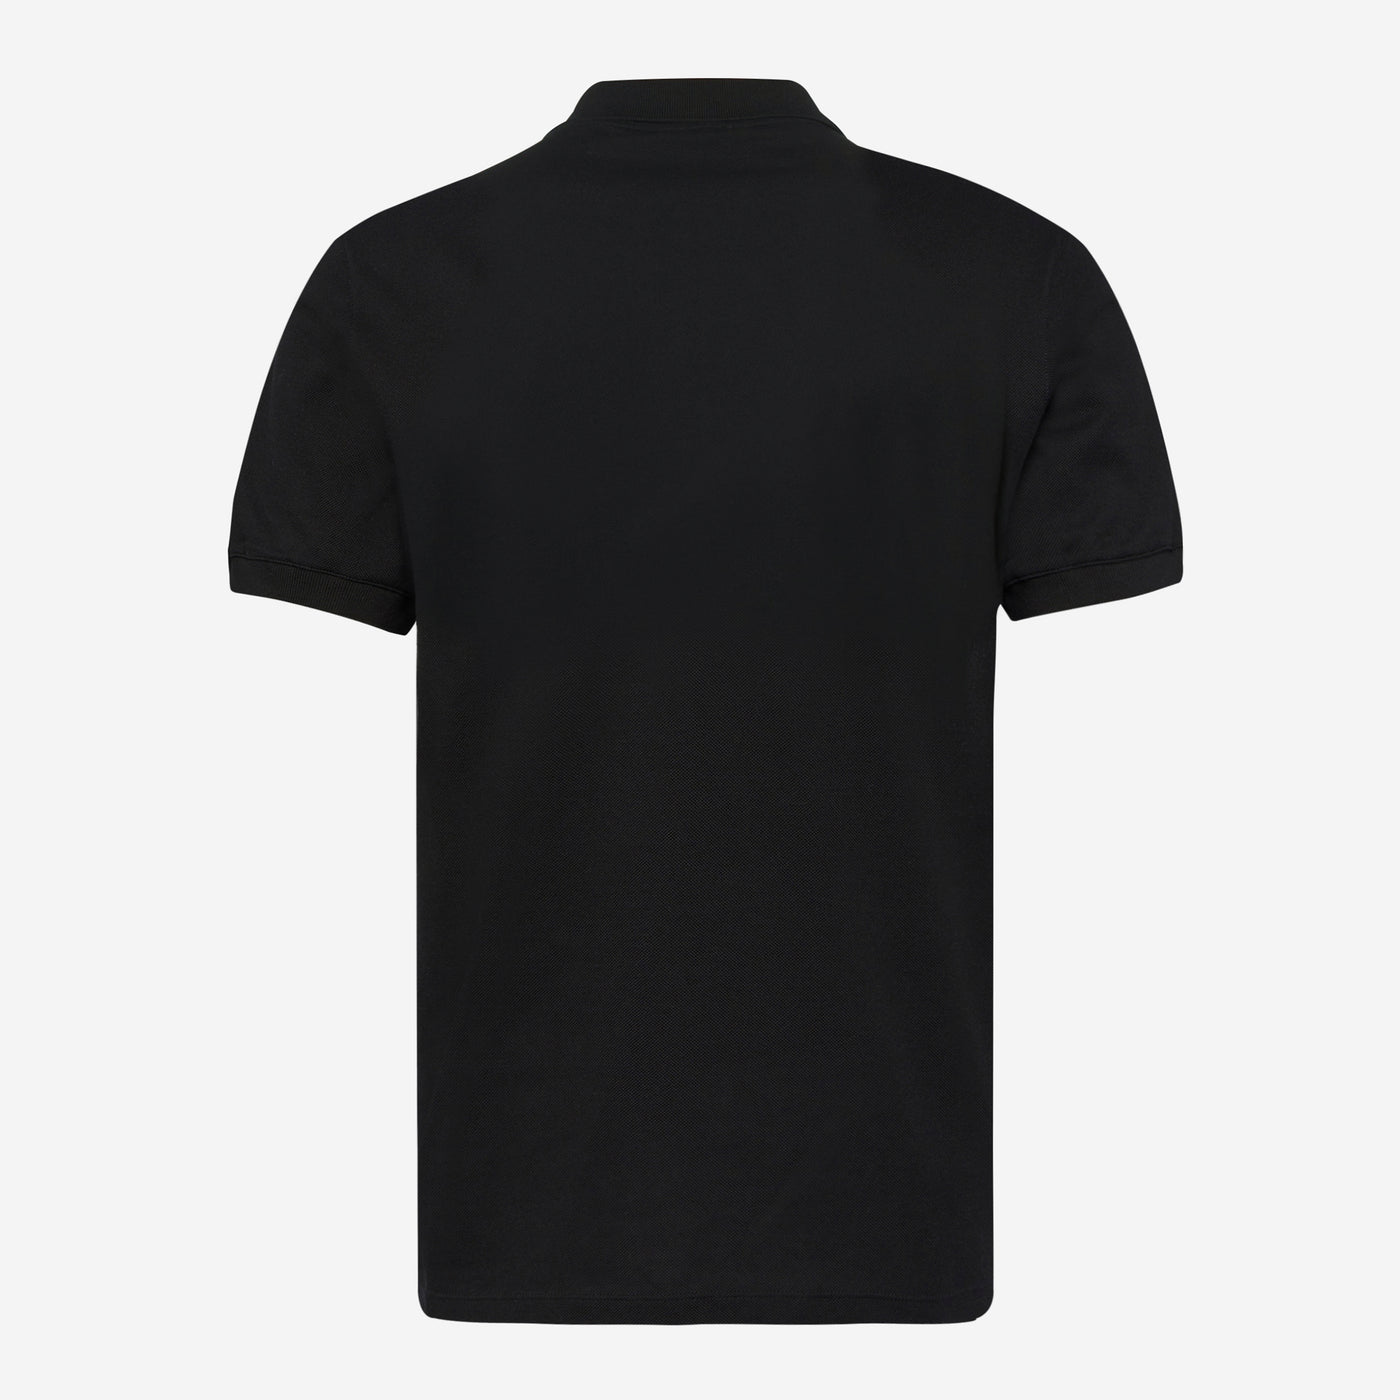 Alexander McQueen Embroidered Chest Polo Shirt